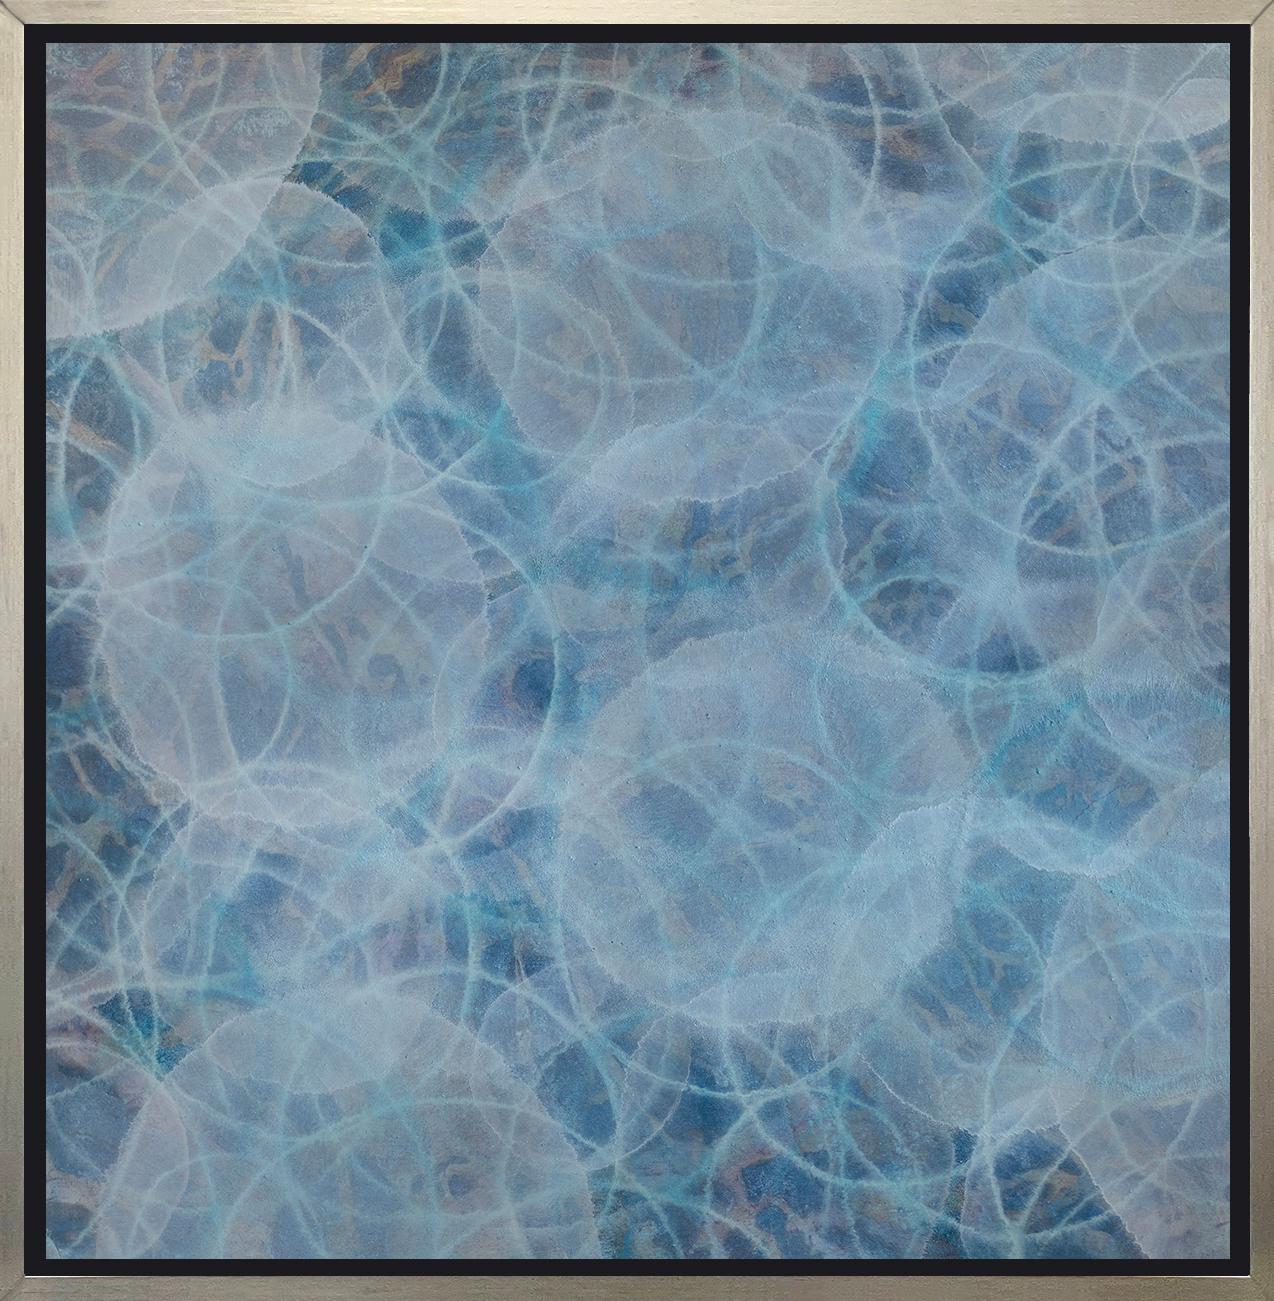 Roger Mudre Abstract Print - "Convolvulos, " Framed Limited Edition Giclee Print, 48" x 48"